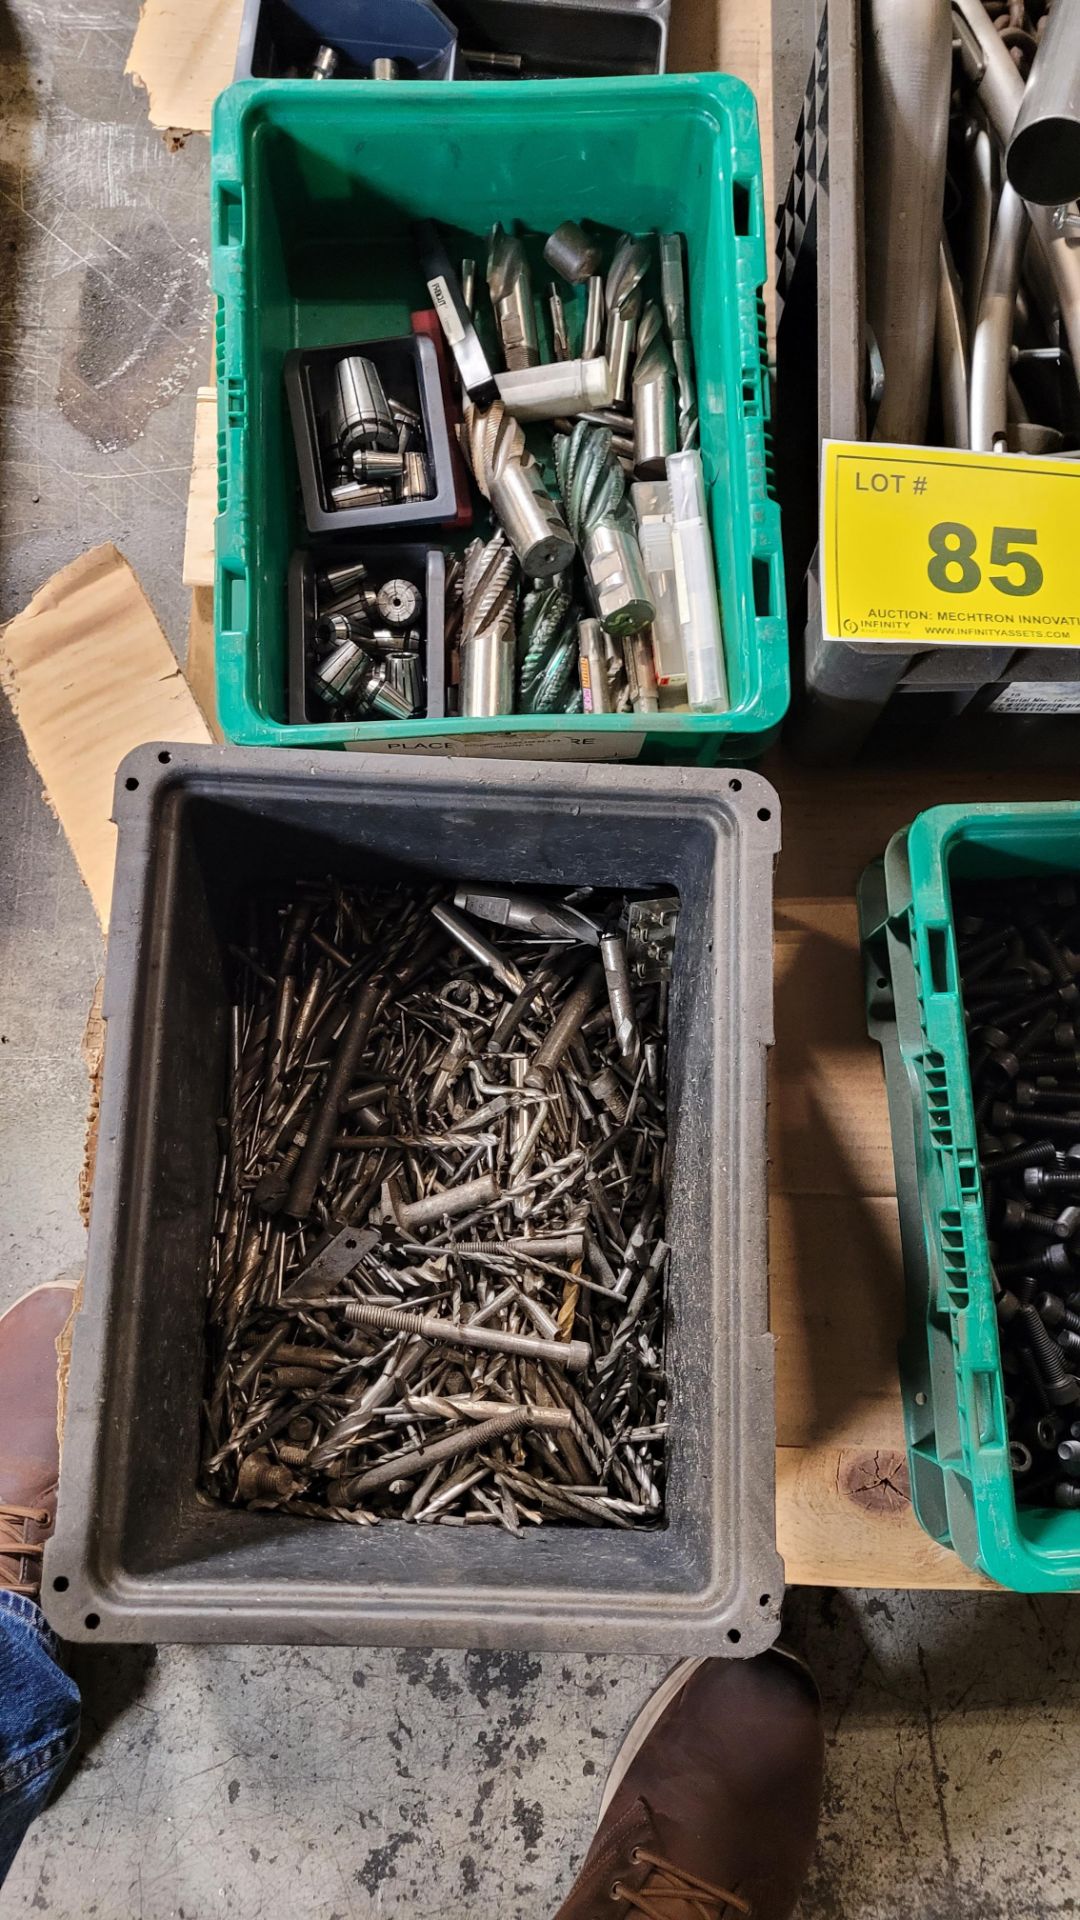 LOT OF ASST. HARDWARE, DRILL BITS, FIXTURES, TOOLING, COLLETS, ETC. - Image 2 of 7